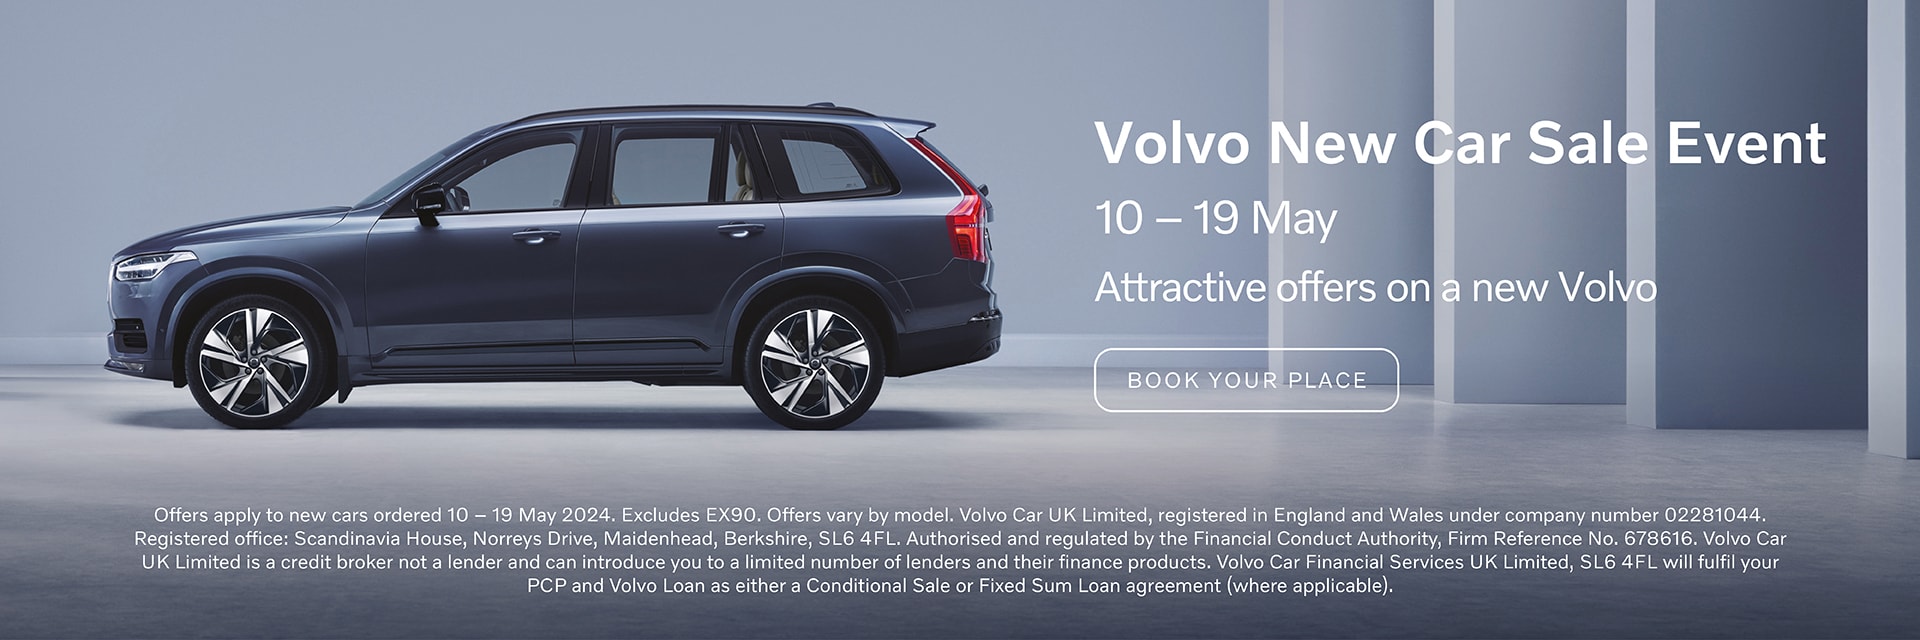 Marshall Volvo New Car Sale Event | 10 - 19 May 2024